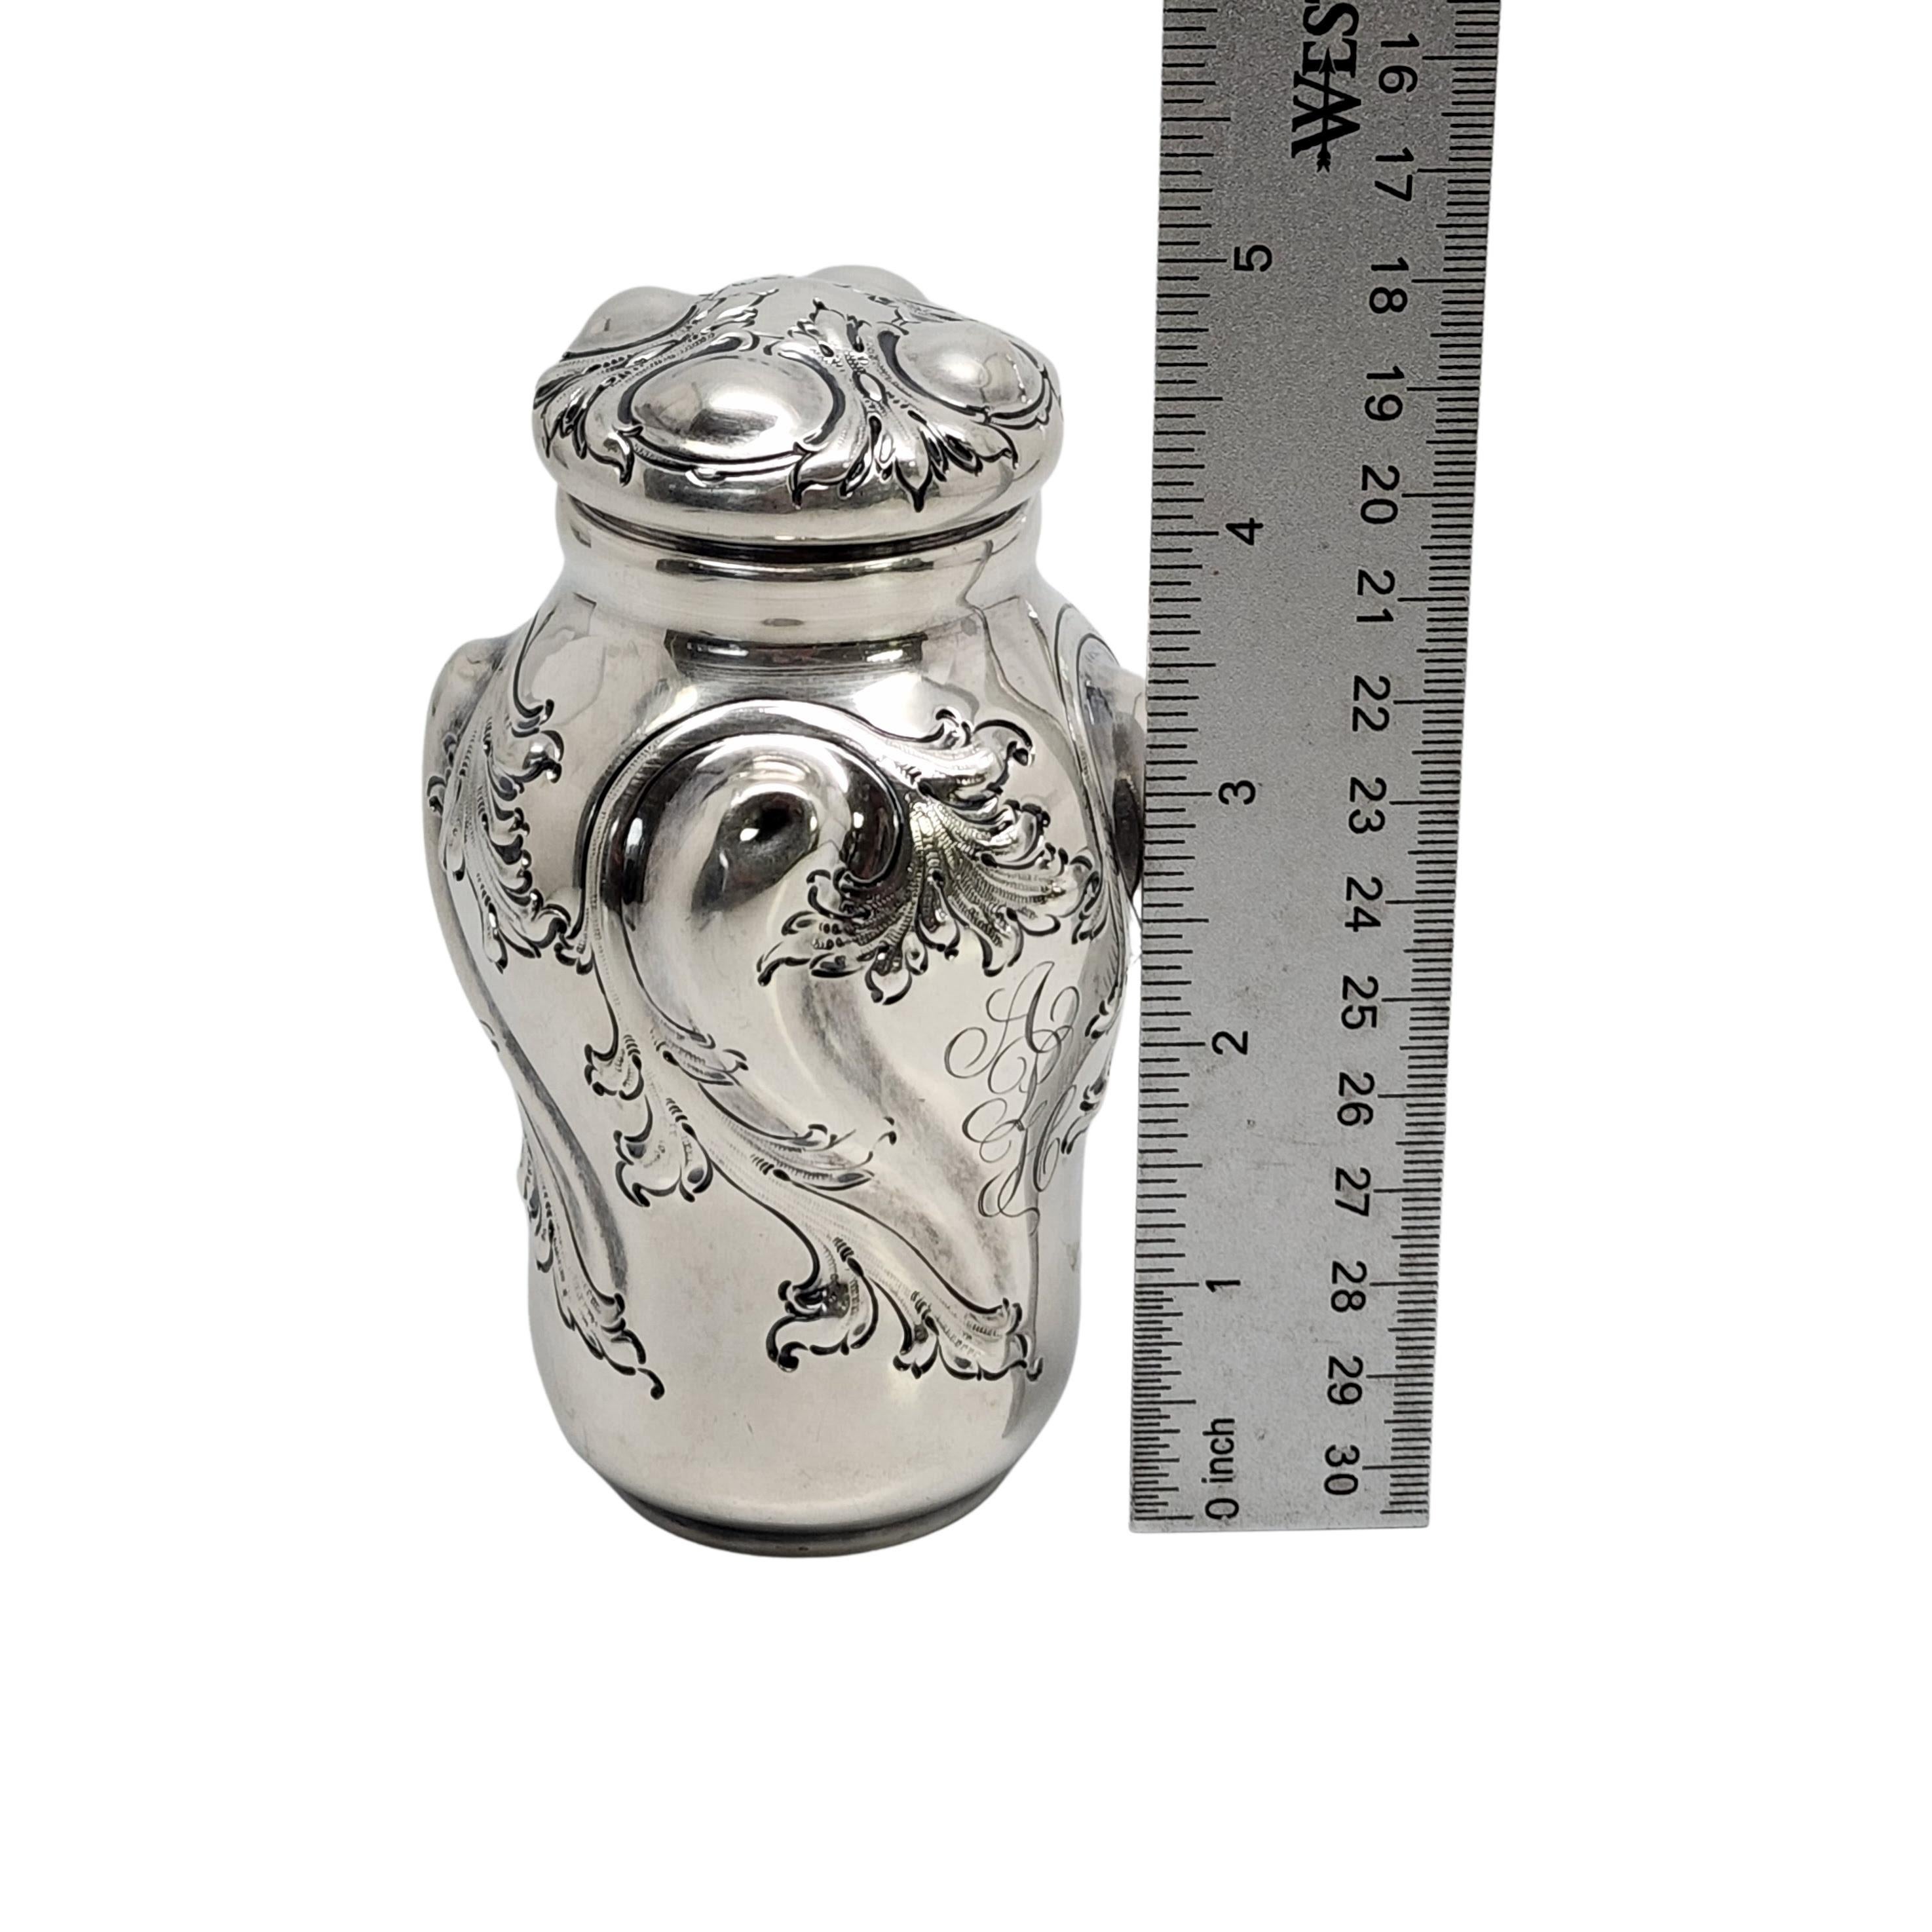 Sterling silver tea caddy by Frank W. Smith for Theodore B Starr of NY, NY with monogram.

Monogram appears to be APH

Bulbous shape with repousse scroll design on sides and on the lid. Ornate monogram on one side.

Measures approx 4 3/4